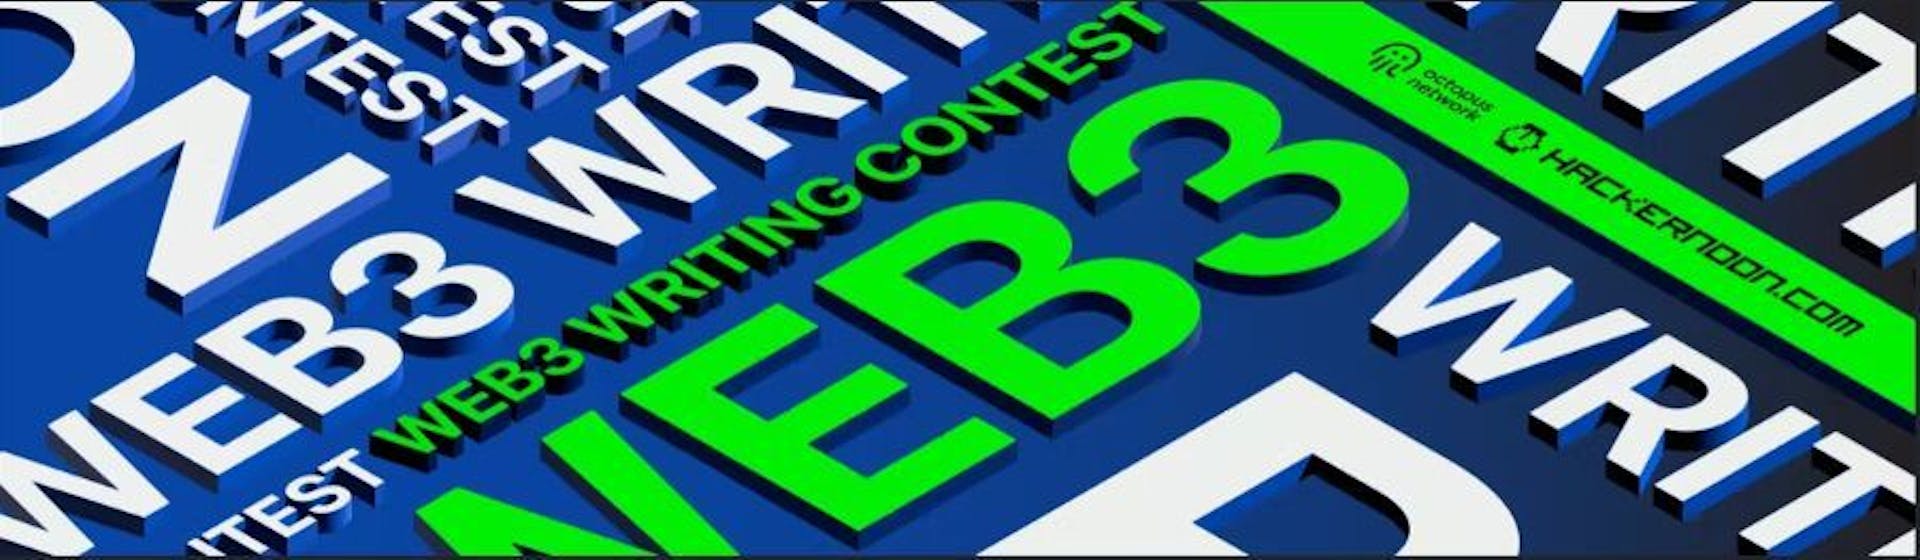 featured image - The Web3 Writing Contest 2022: Final Round's Results Announced!